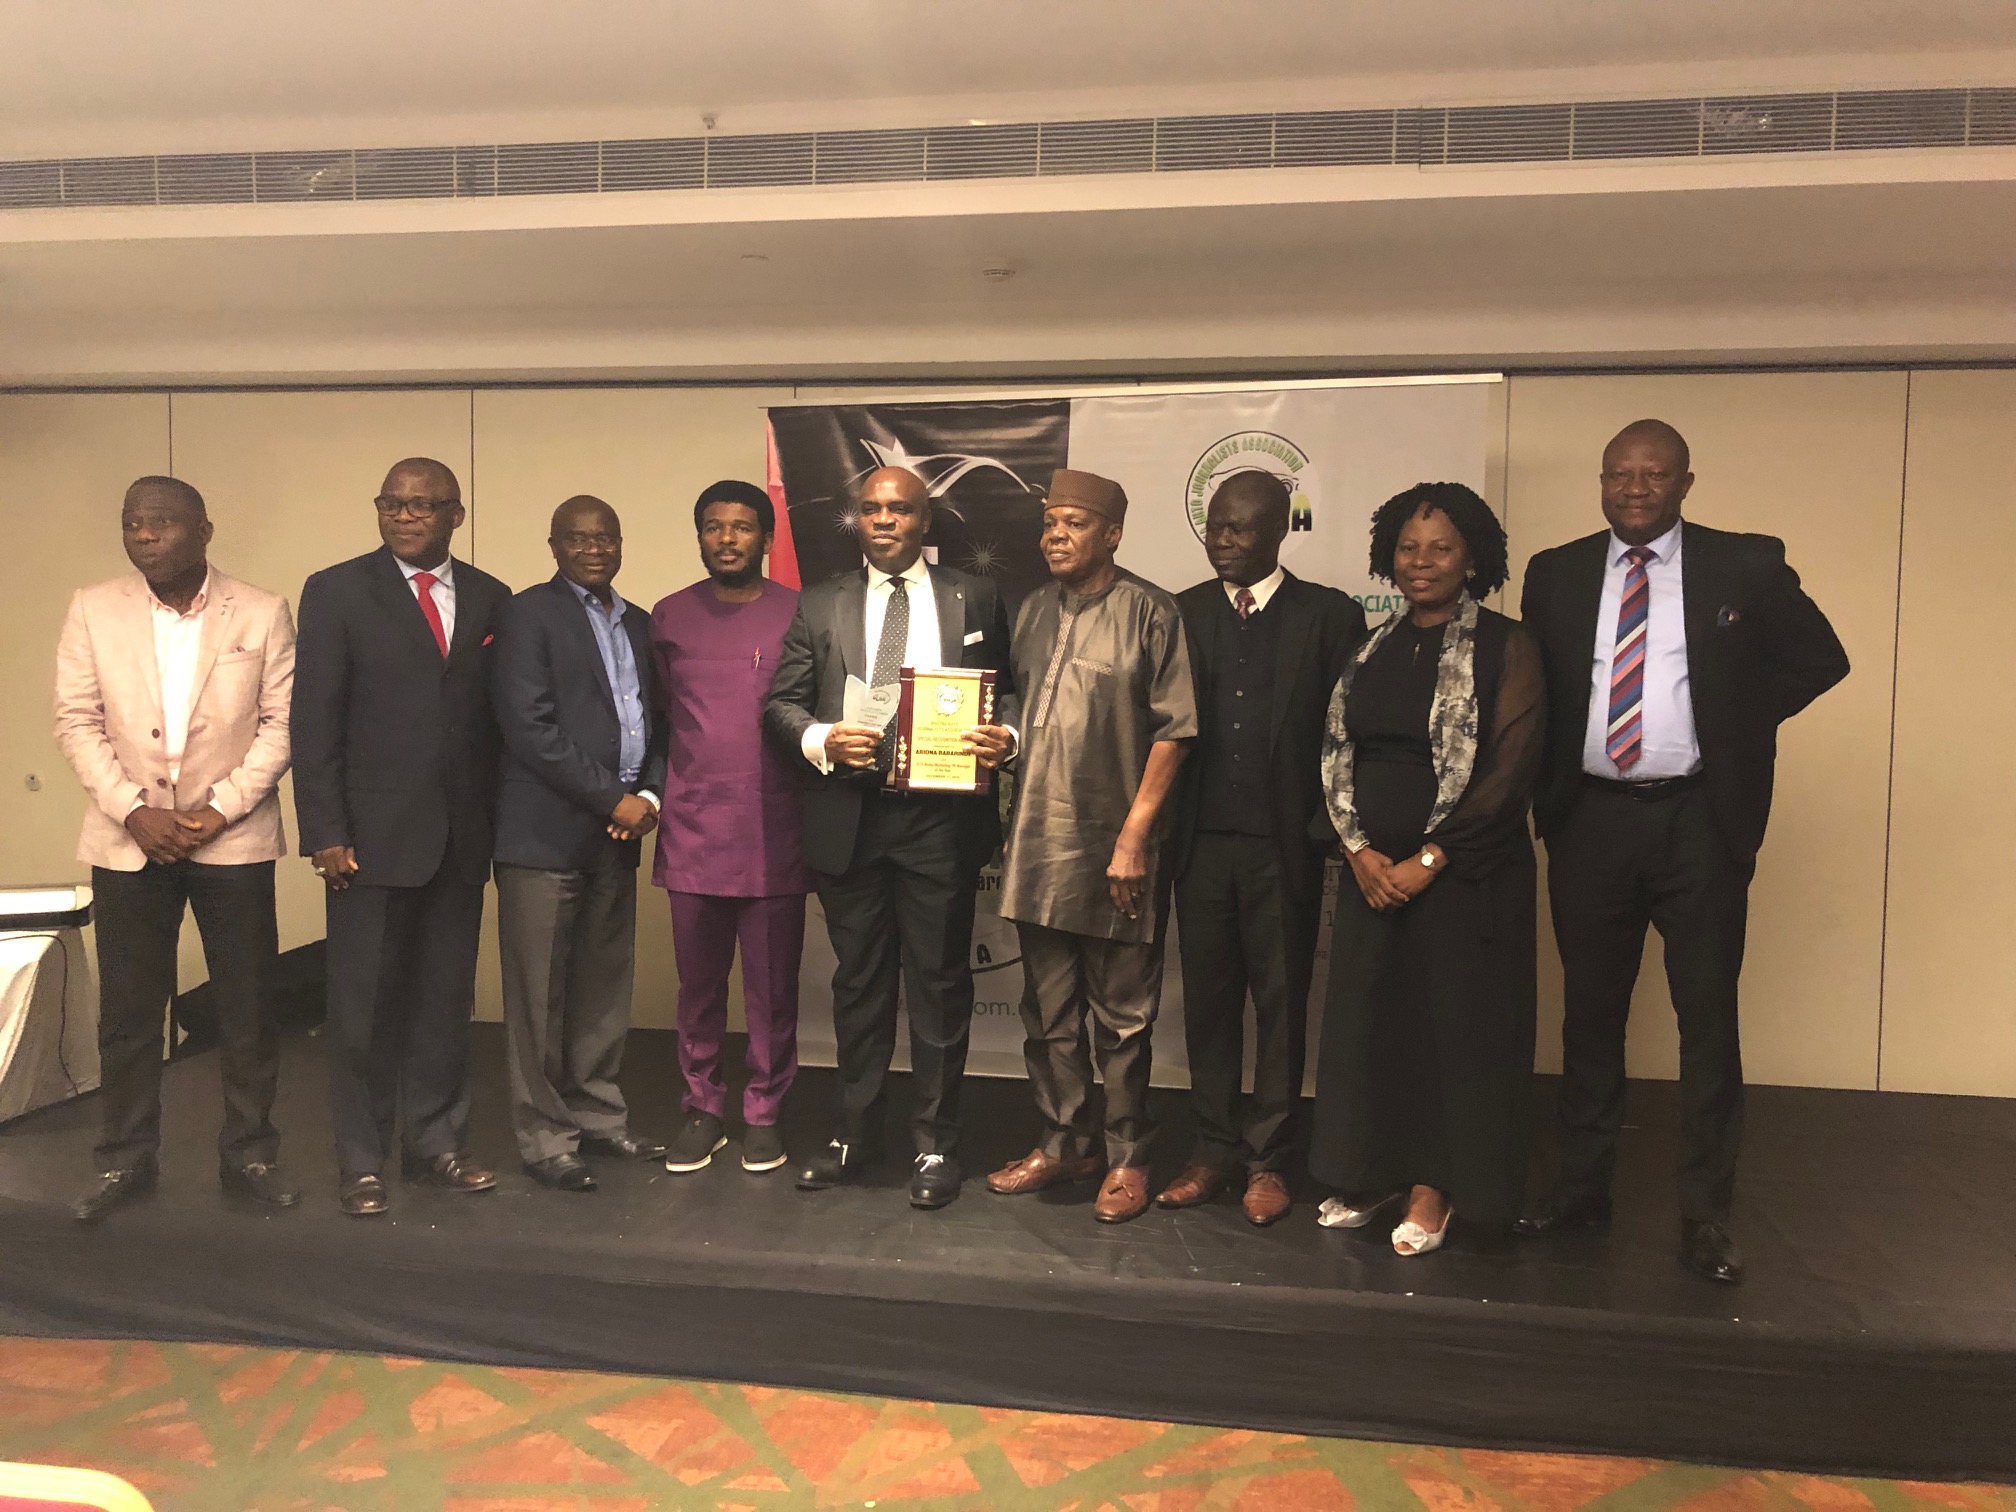 Cross-section-of-stakeholders-celebrating-the-Coscharis-awards